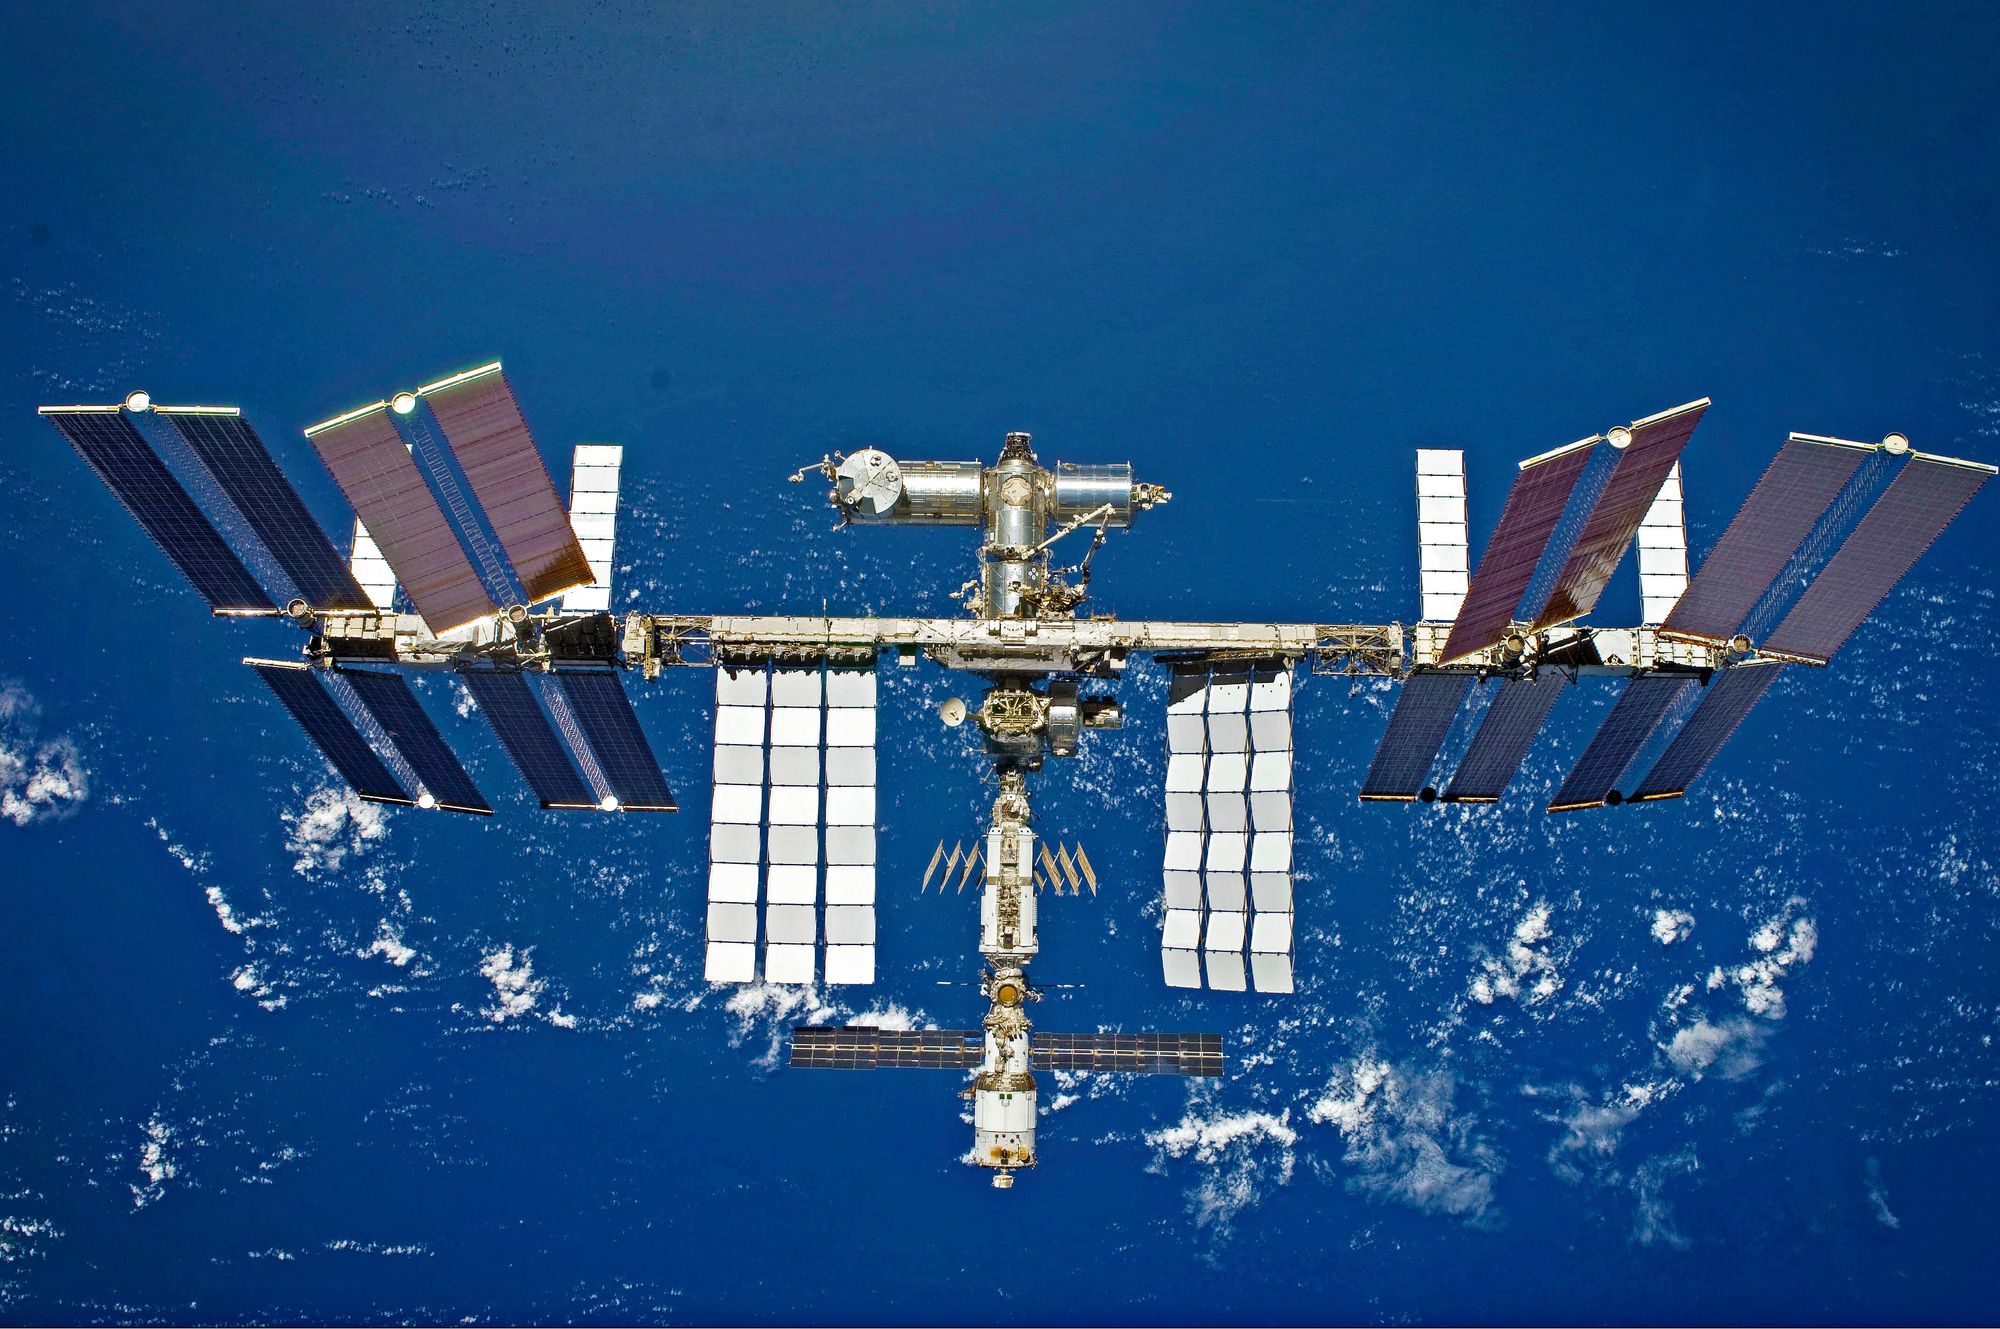 The International Space Station as seen from above. ©ESA